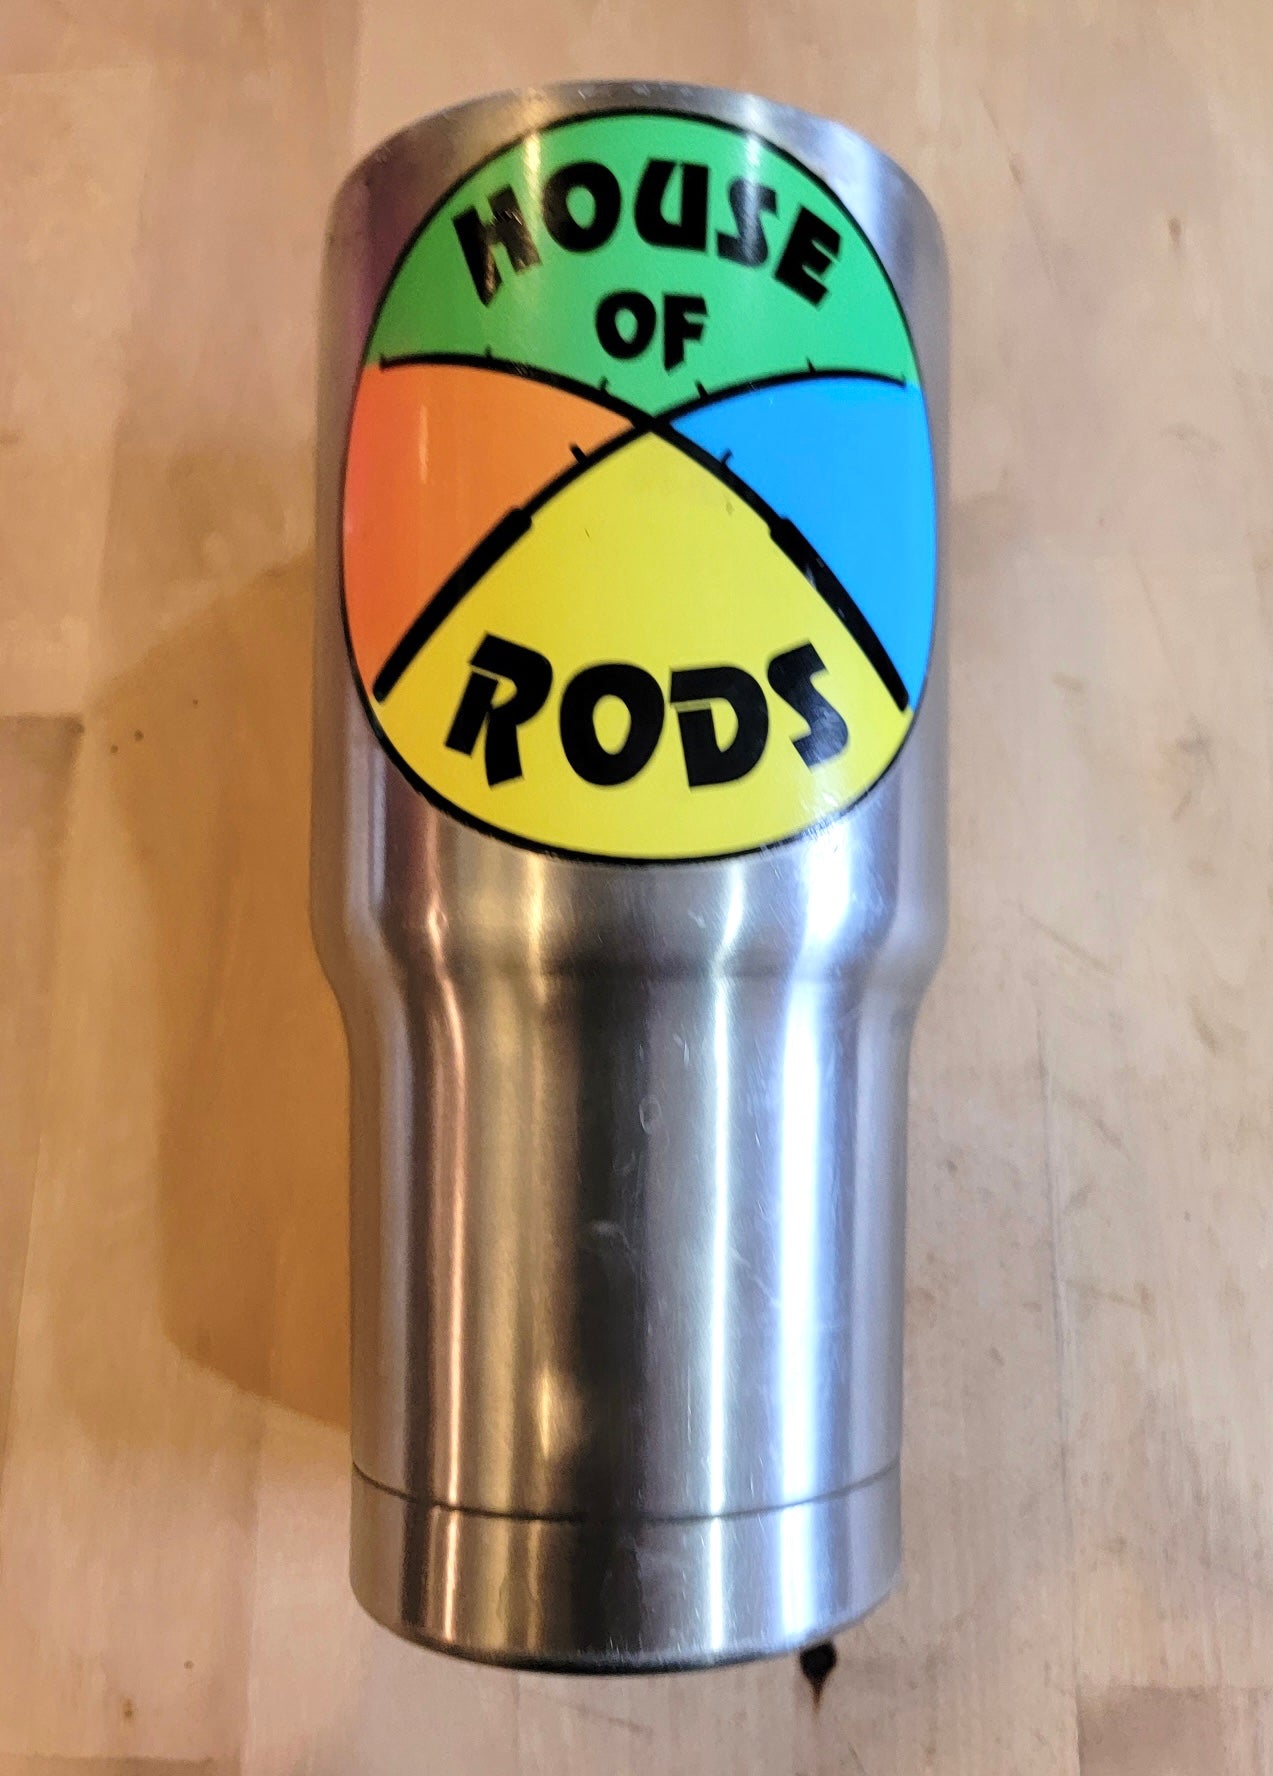 House of Rods Stainless Tumbler